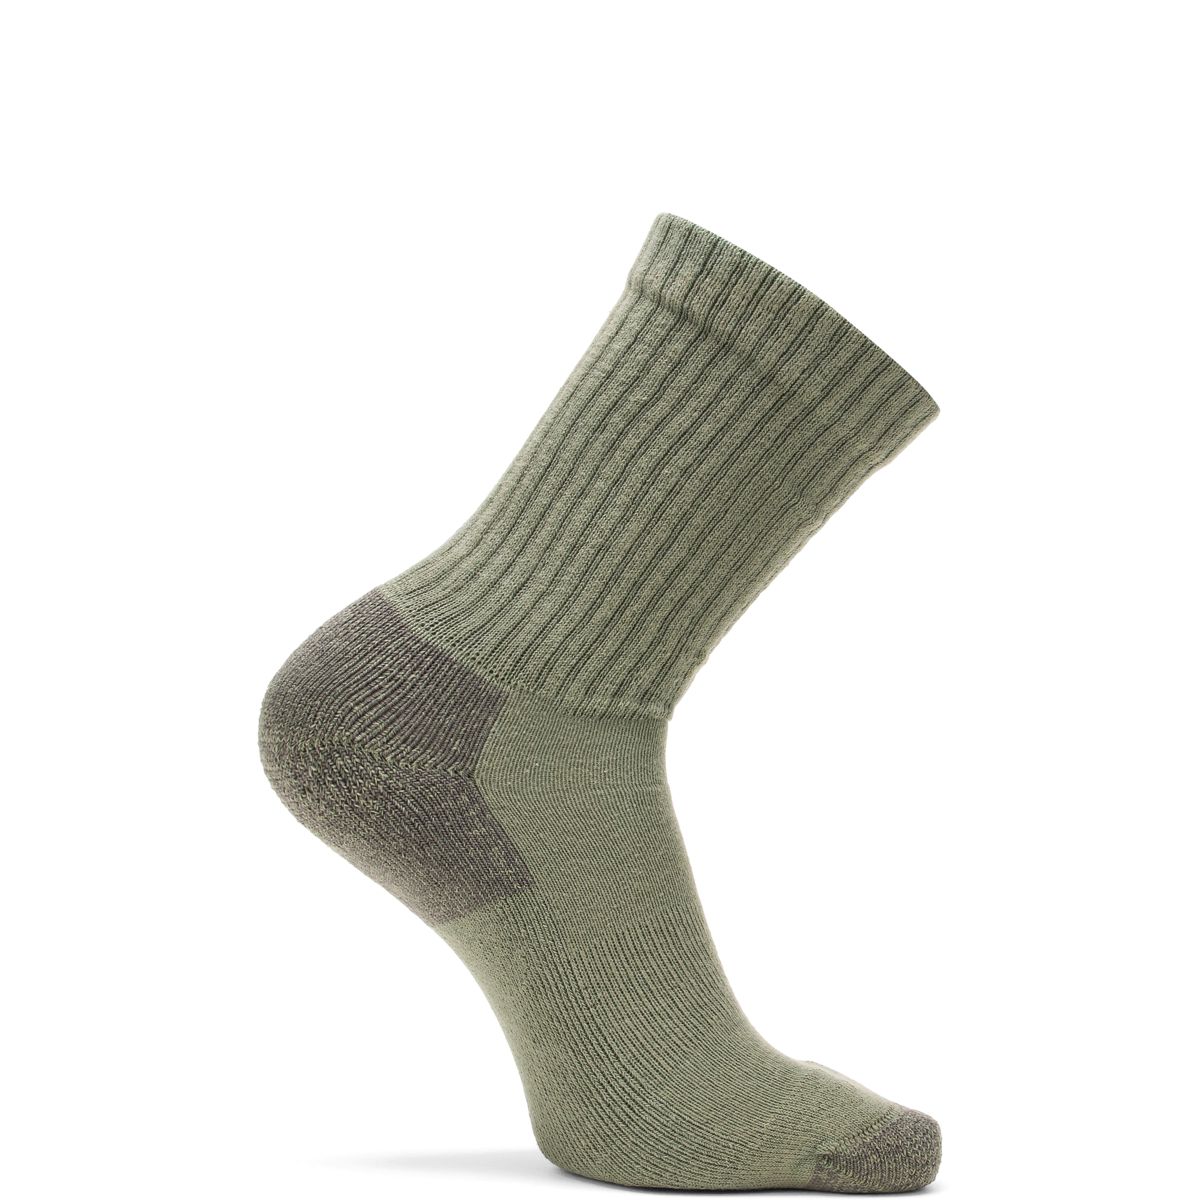 Navy and Green Cotton Heel & Toe Socks, Men's Country Clothing